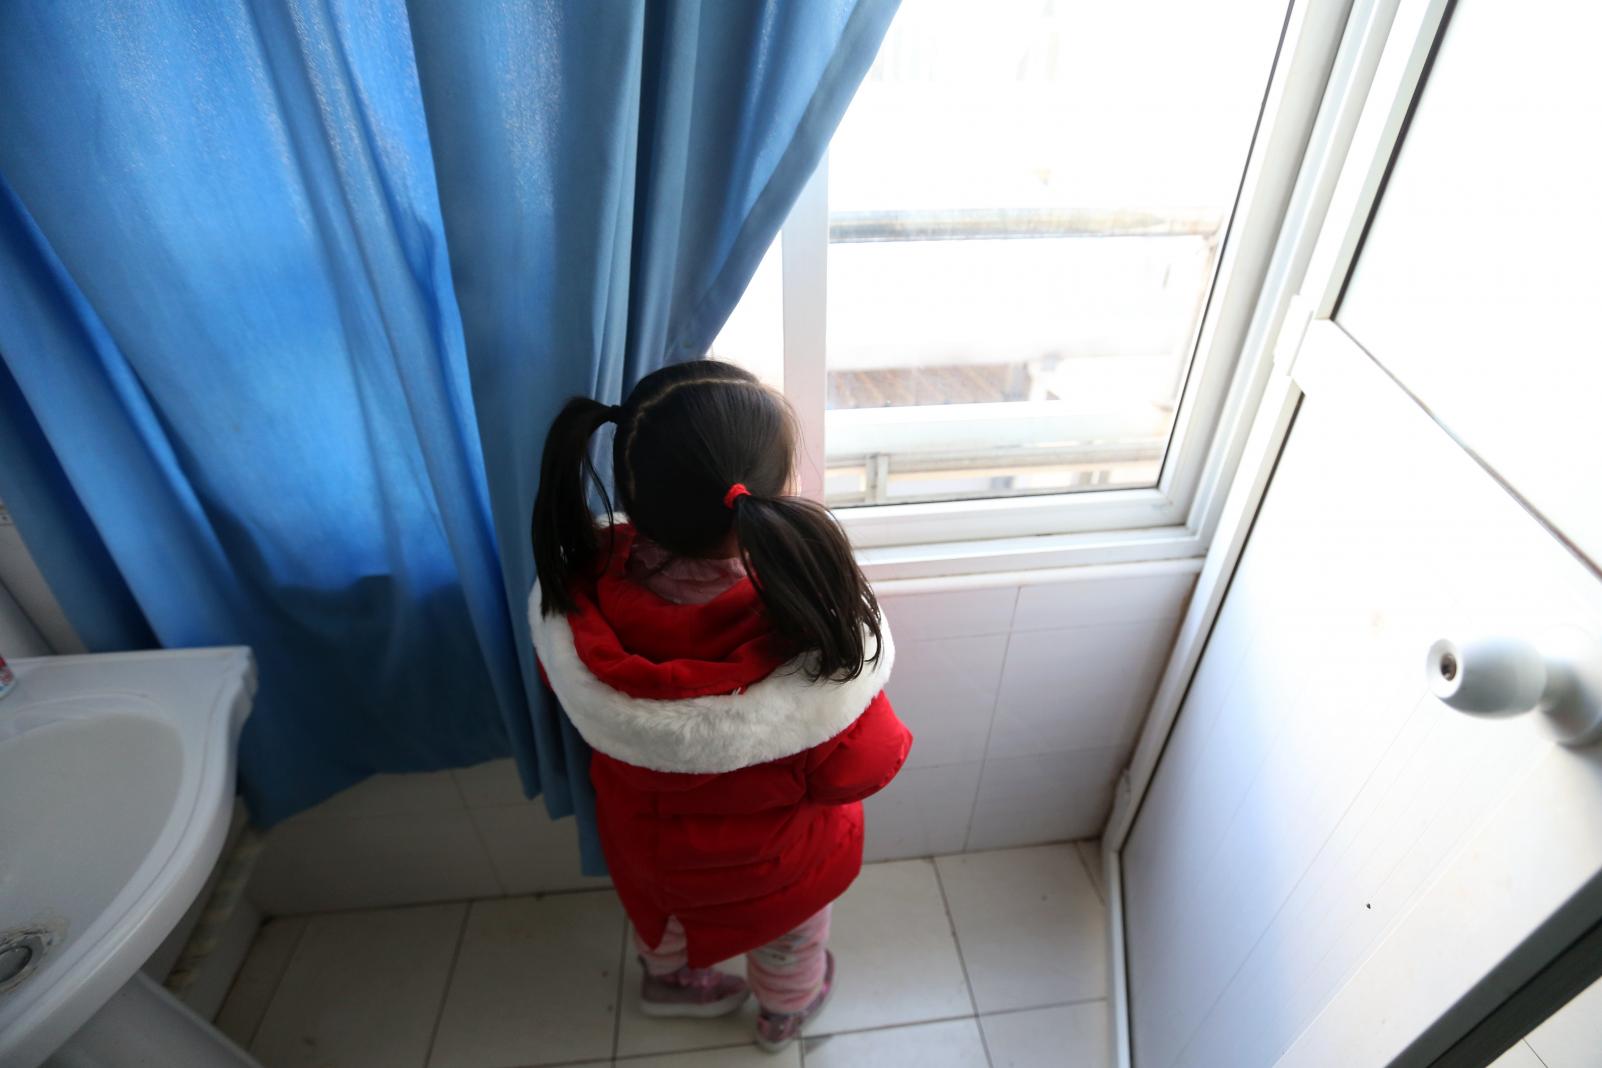 A child looking out the window, unable to go outside to play.